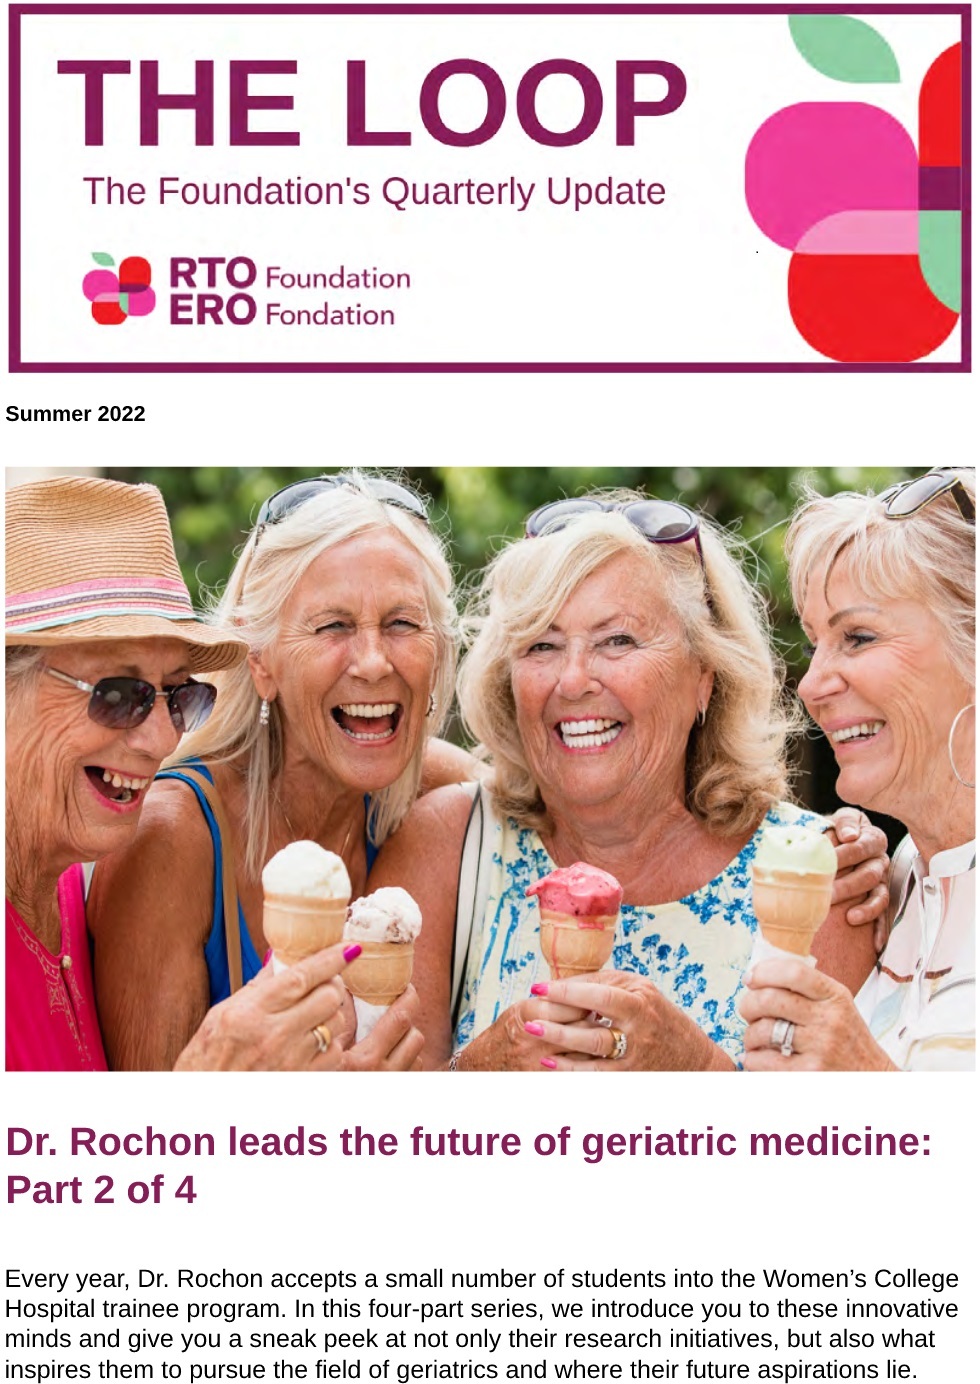 Dr. Rochon leads the future of geriatric medicine: Part 2 of 4